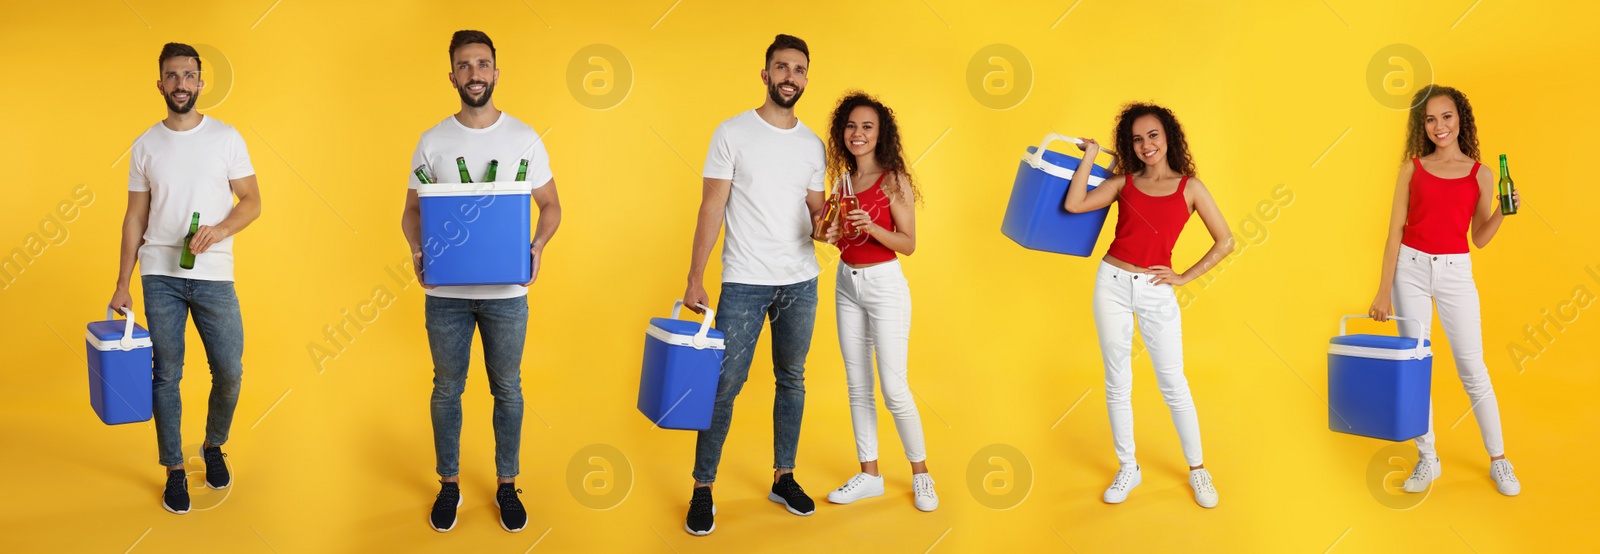 Image of Collage with photos of people holding cool boxes on yellow background. Banner design